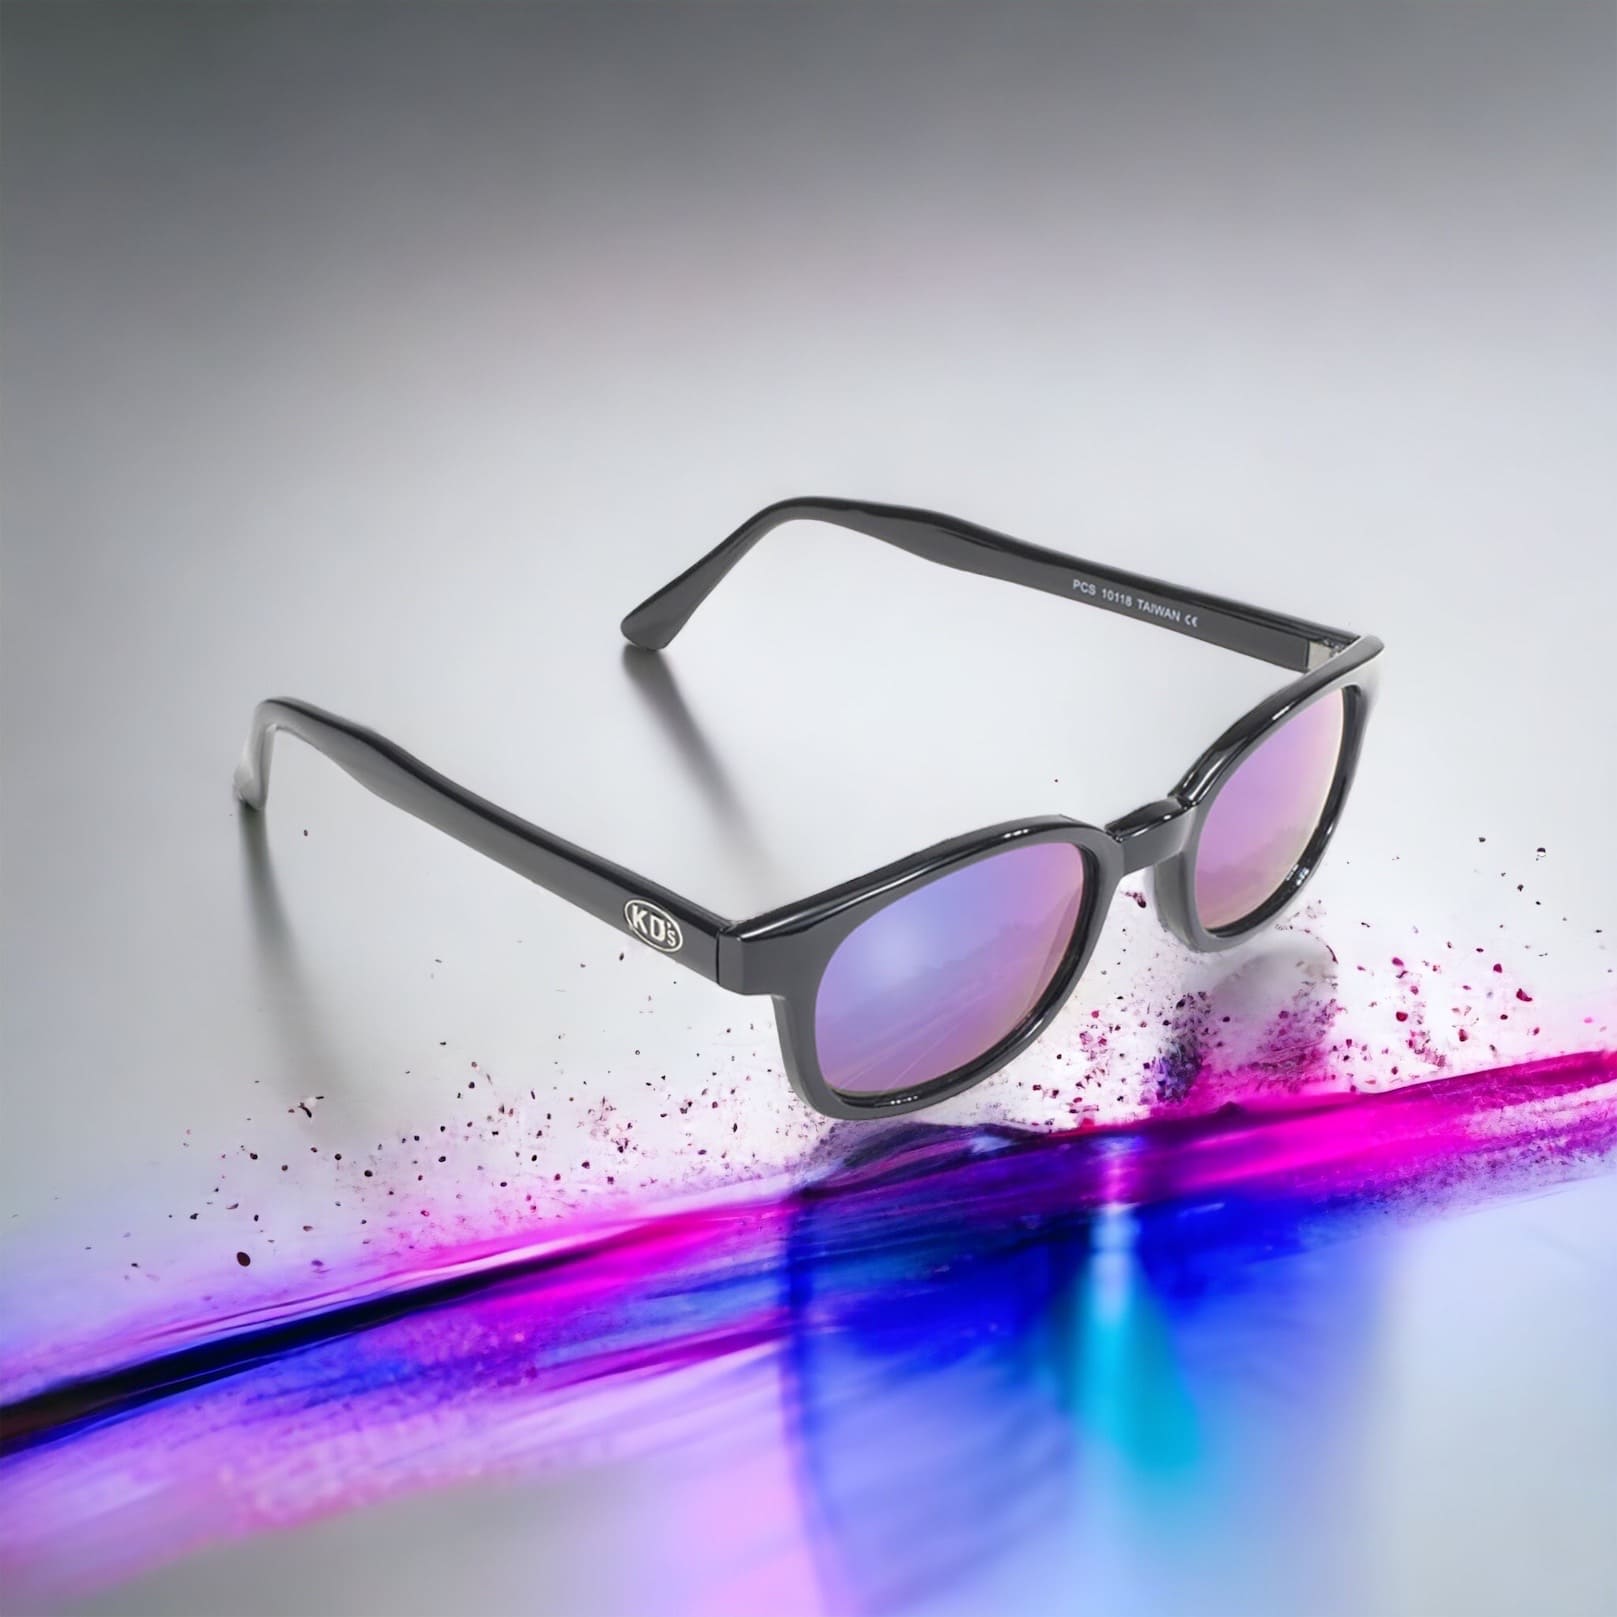 X-KD's 10118 large sunglasses for sportsmen and bikers with a stylish black frame and iridescent polycarbonate mirror lenses in front of a paint chip.